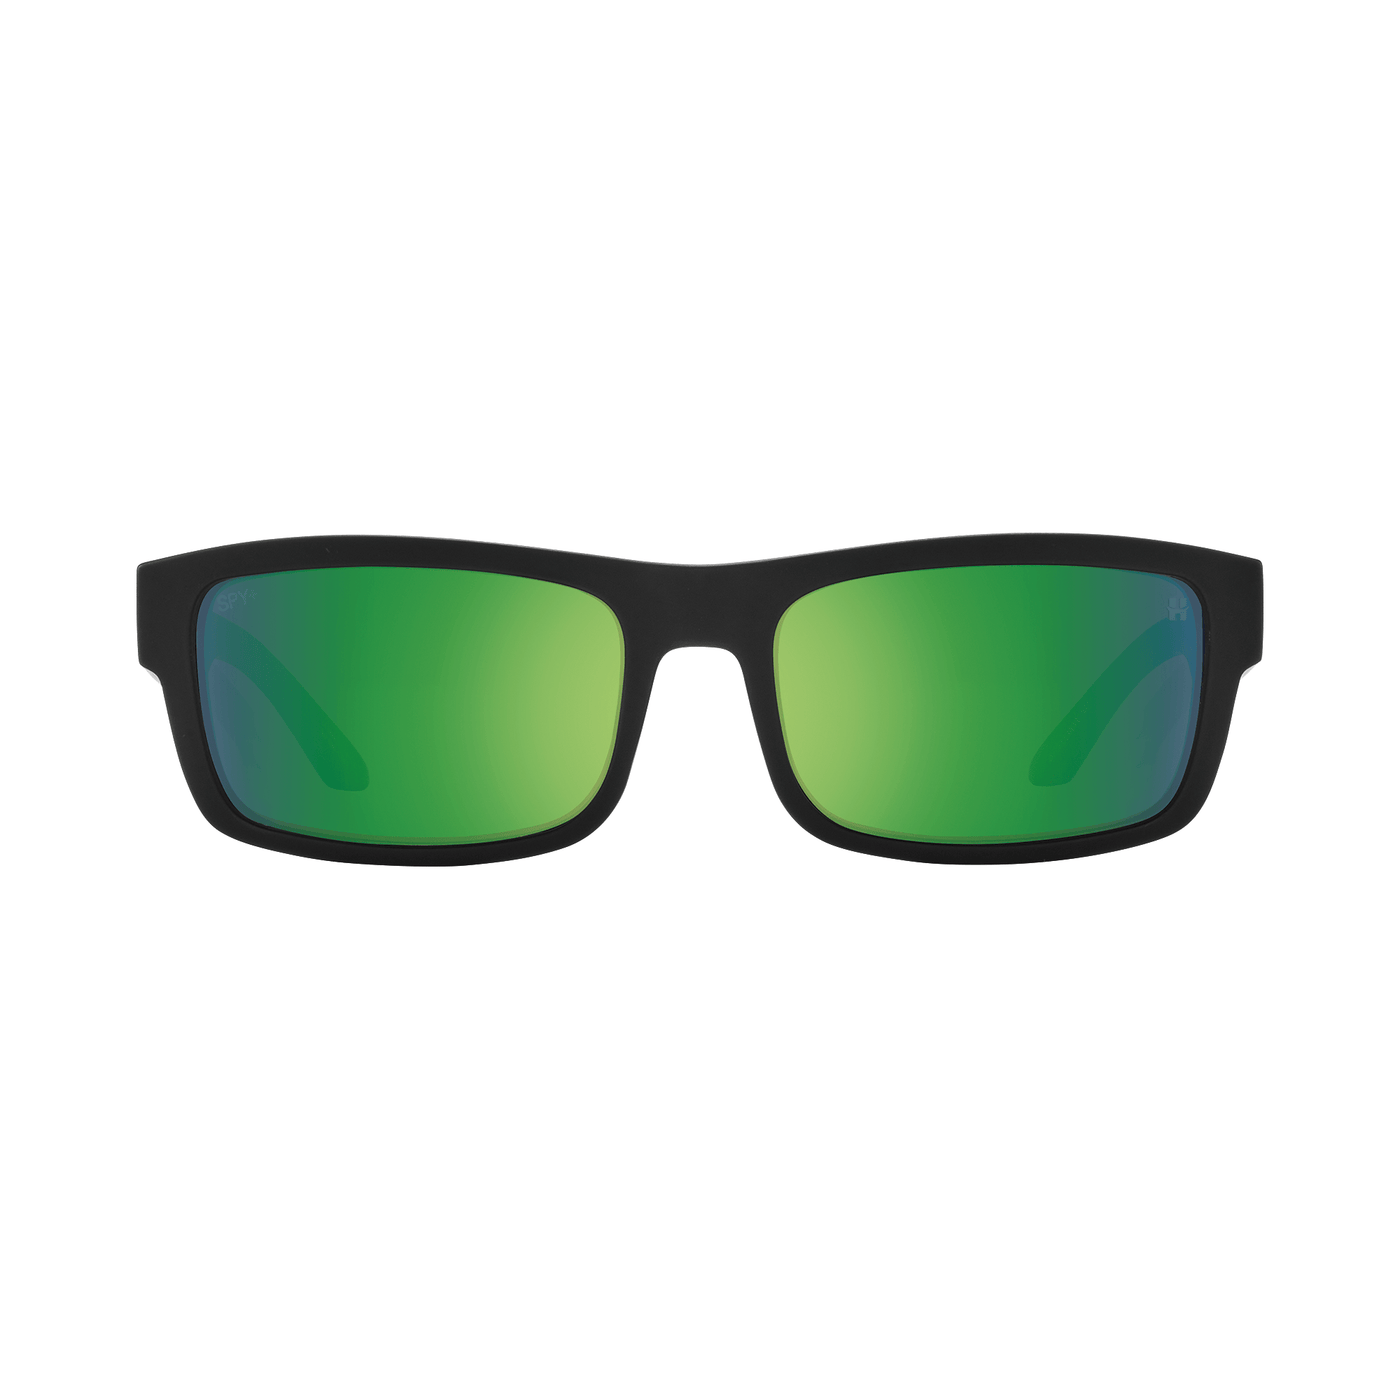 SPY DISCORD LITE Polarized Sunglasses, Happy Lens - Green 8Lines Shop - Fast Shipping